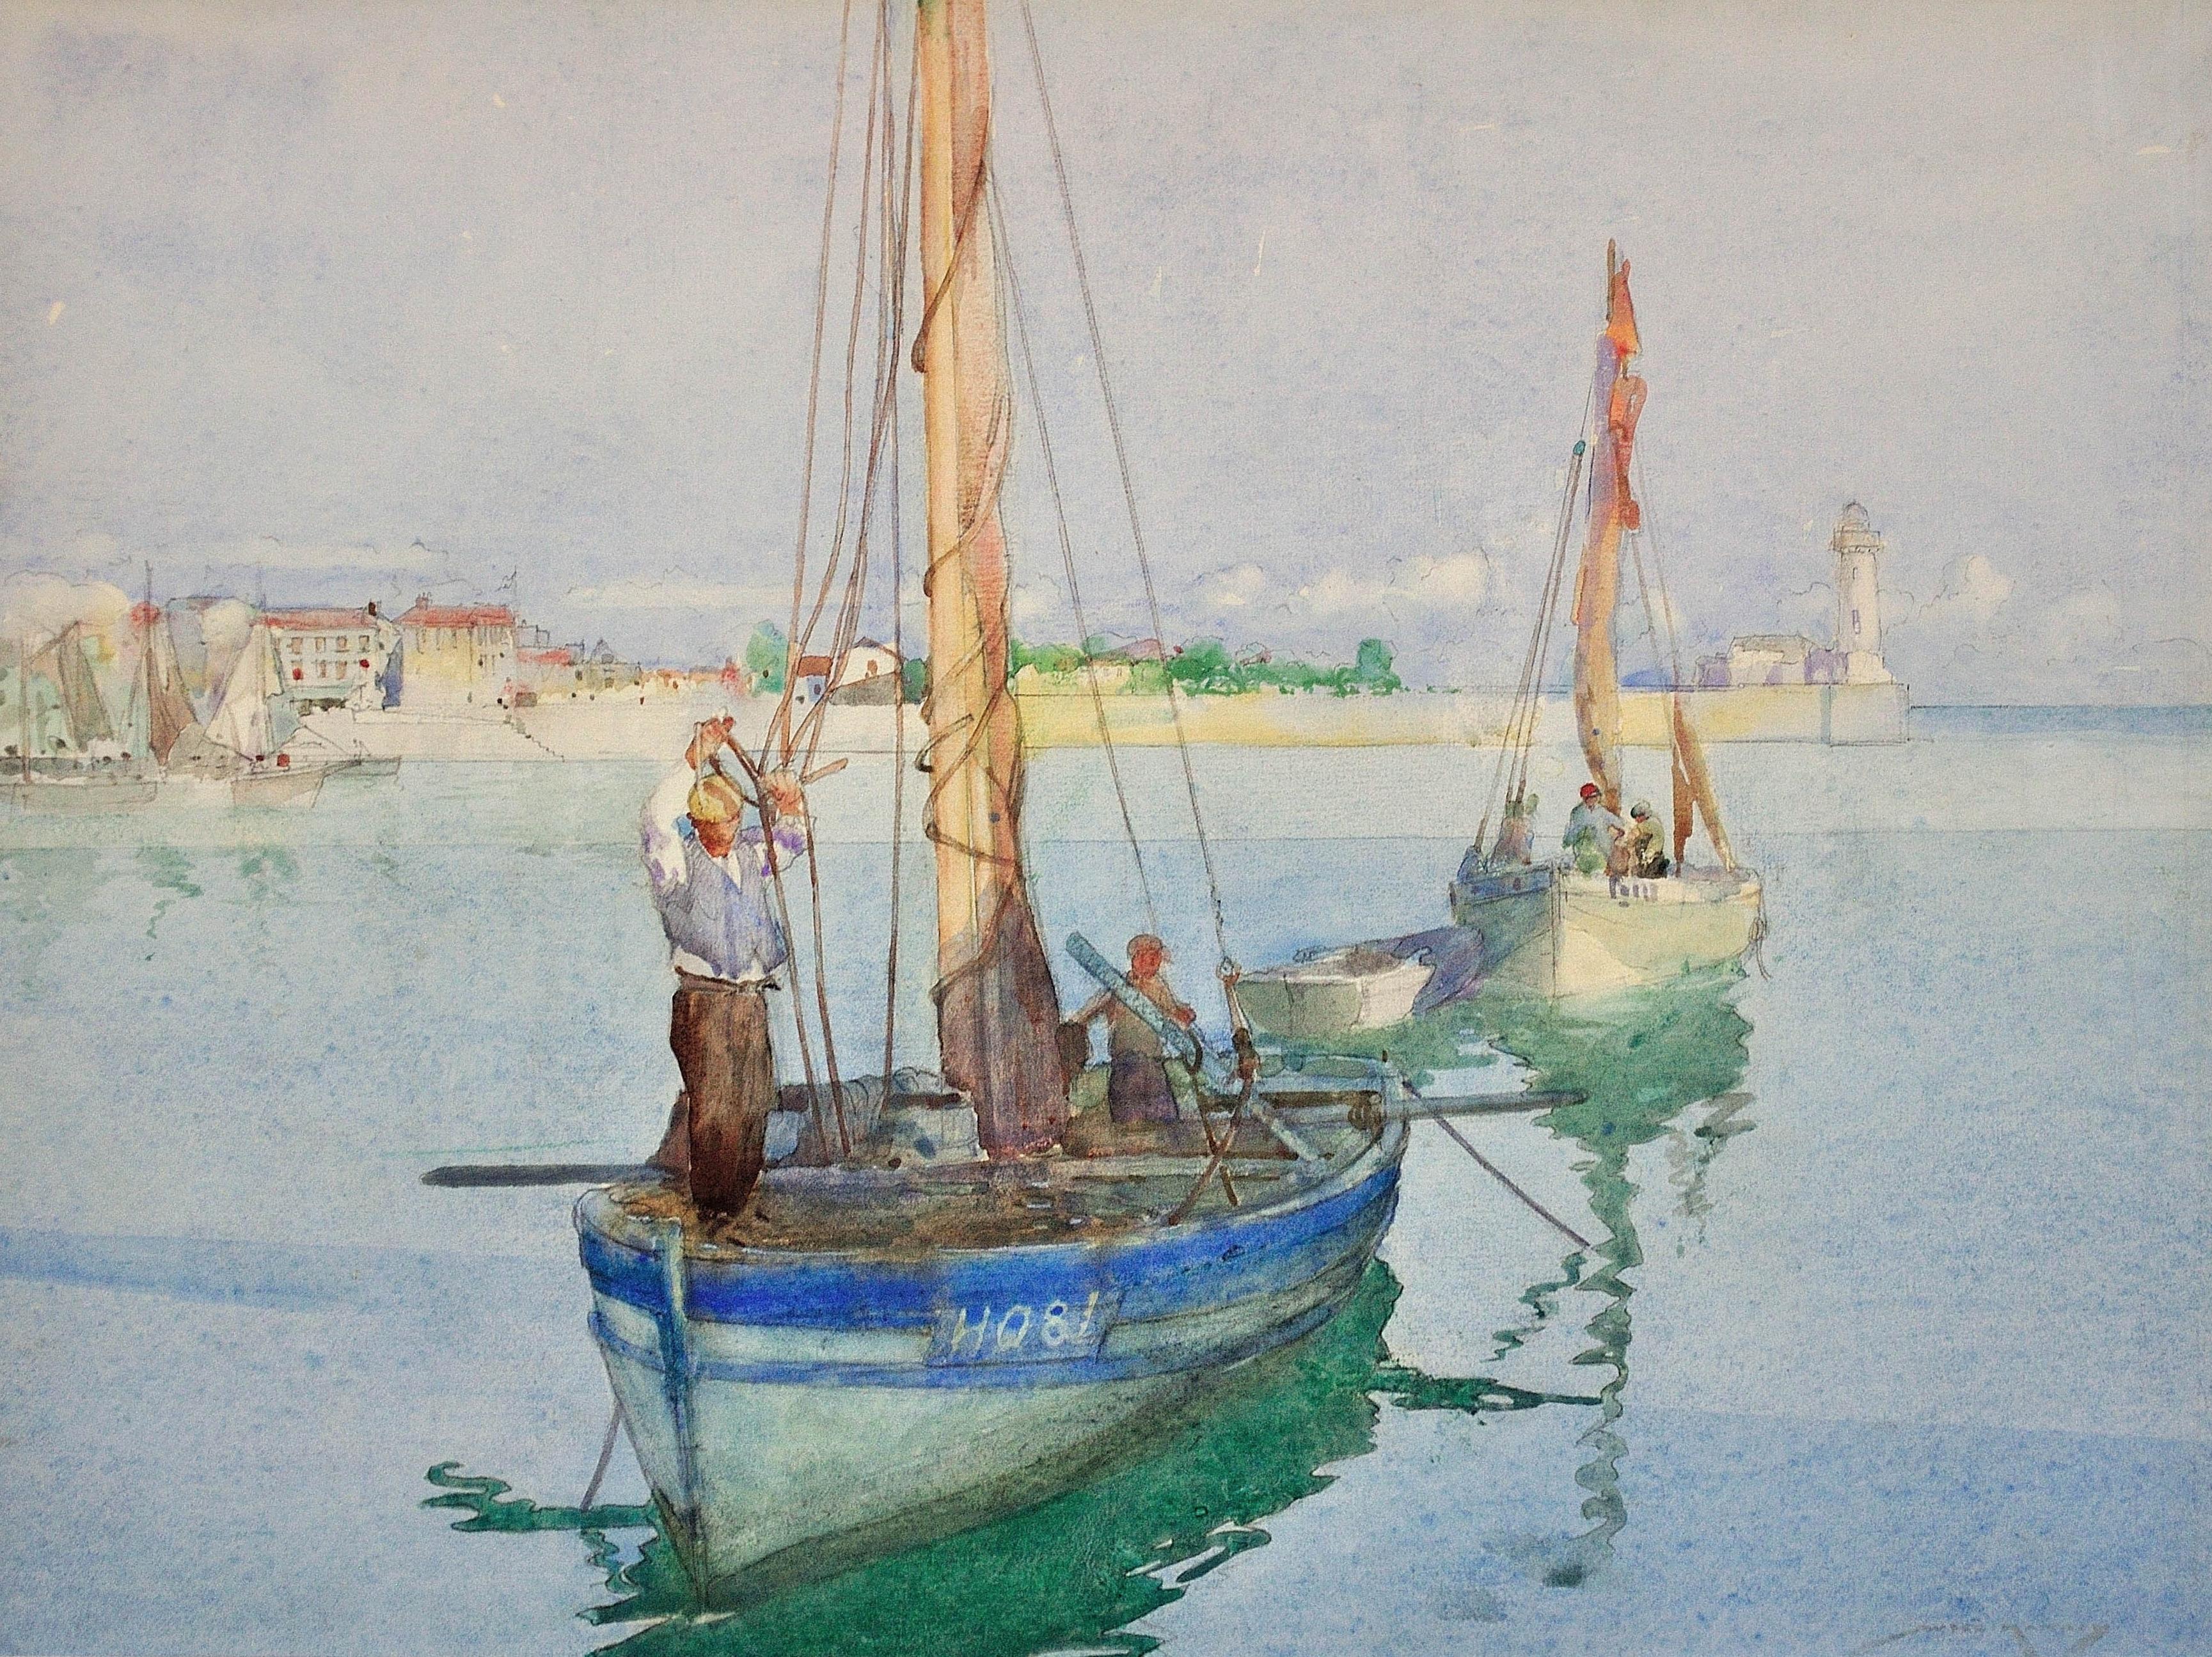 Making Small Repairs, Port of Honfleur. Normandy.Fishing Boats.Fishermen. French - Art by William Lee Hankey